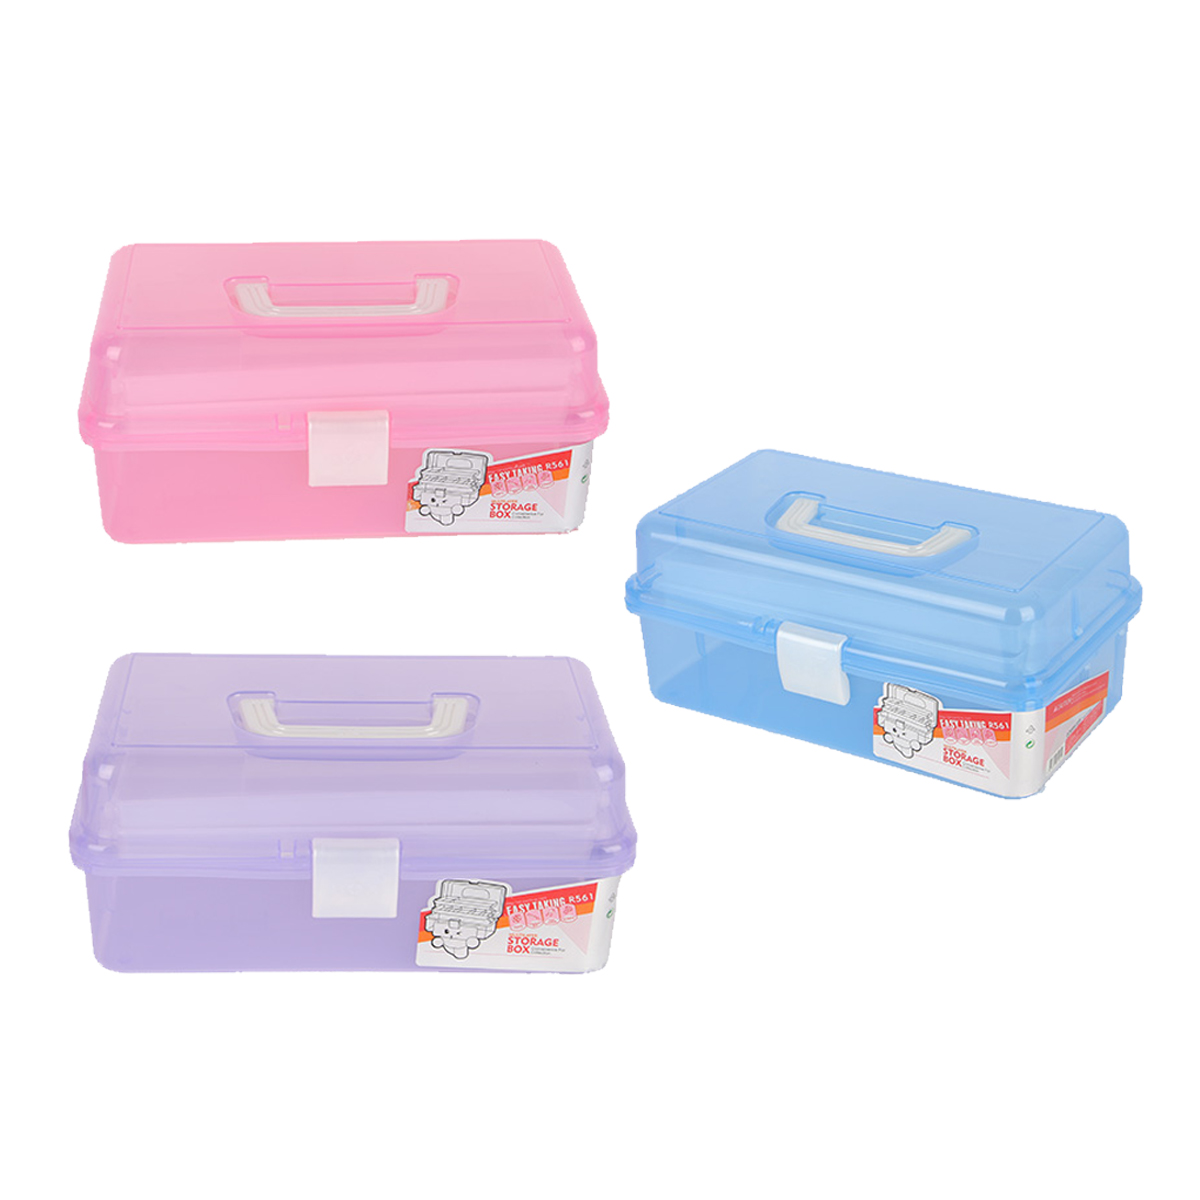 Clear-Plastic-Craft-Makeup-Organizer-Jewelry-Storage-Compartment-Tools-Box-Case-1263882-1